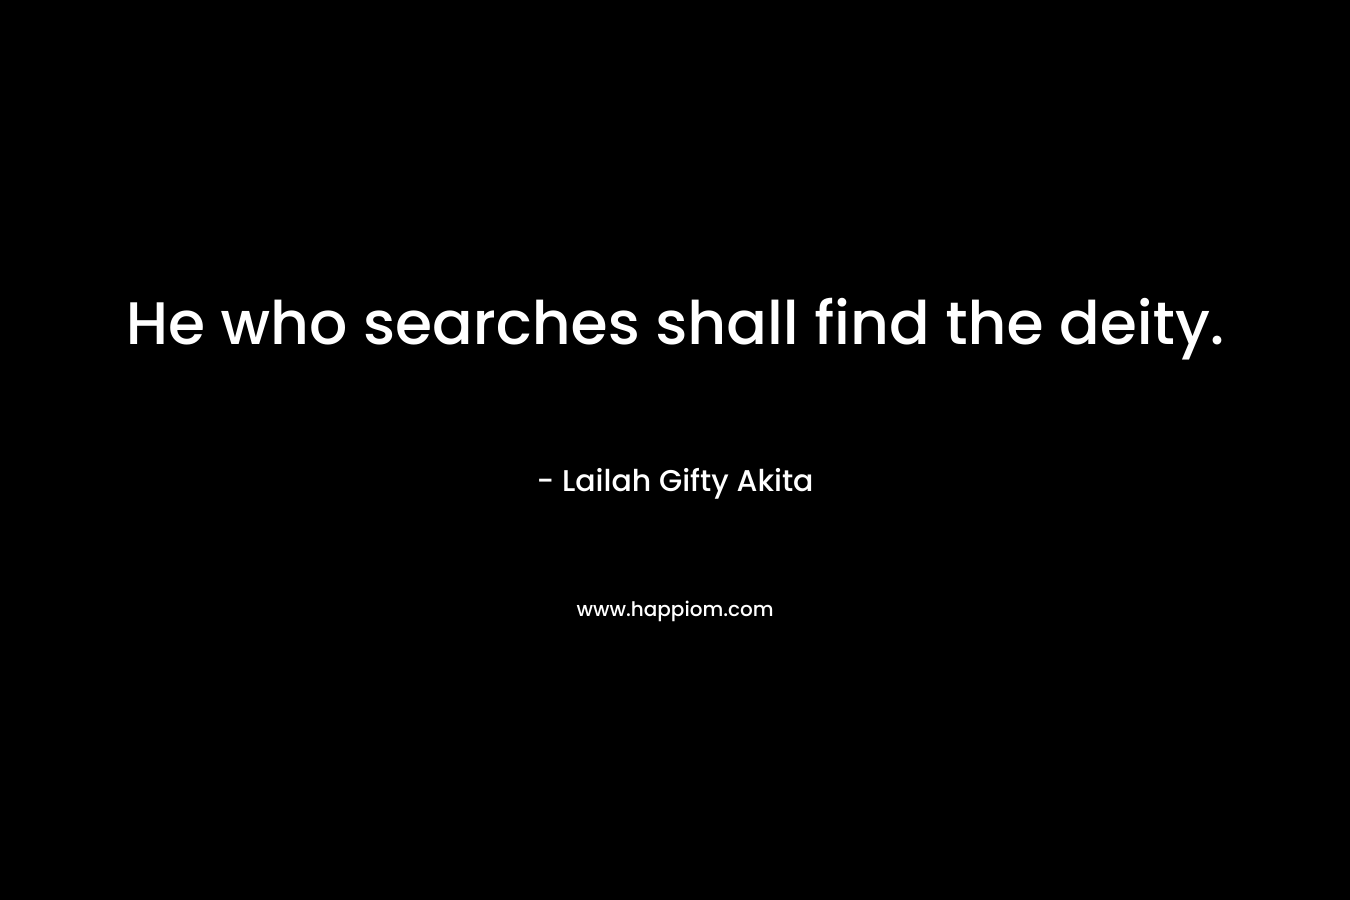 He who searches shall find the deity. – Lailah Gifty Akita